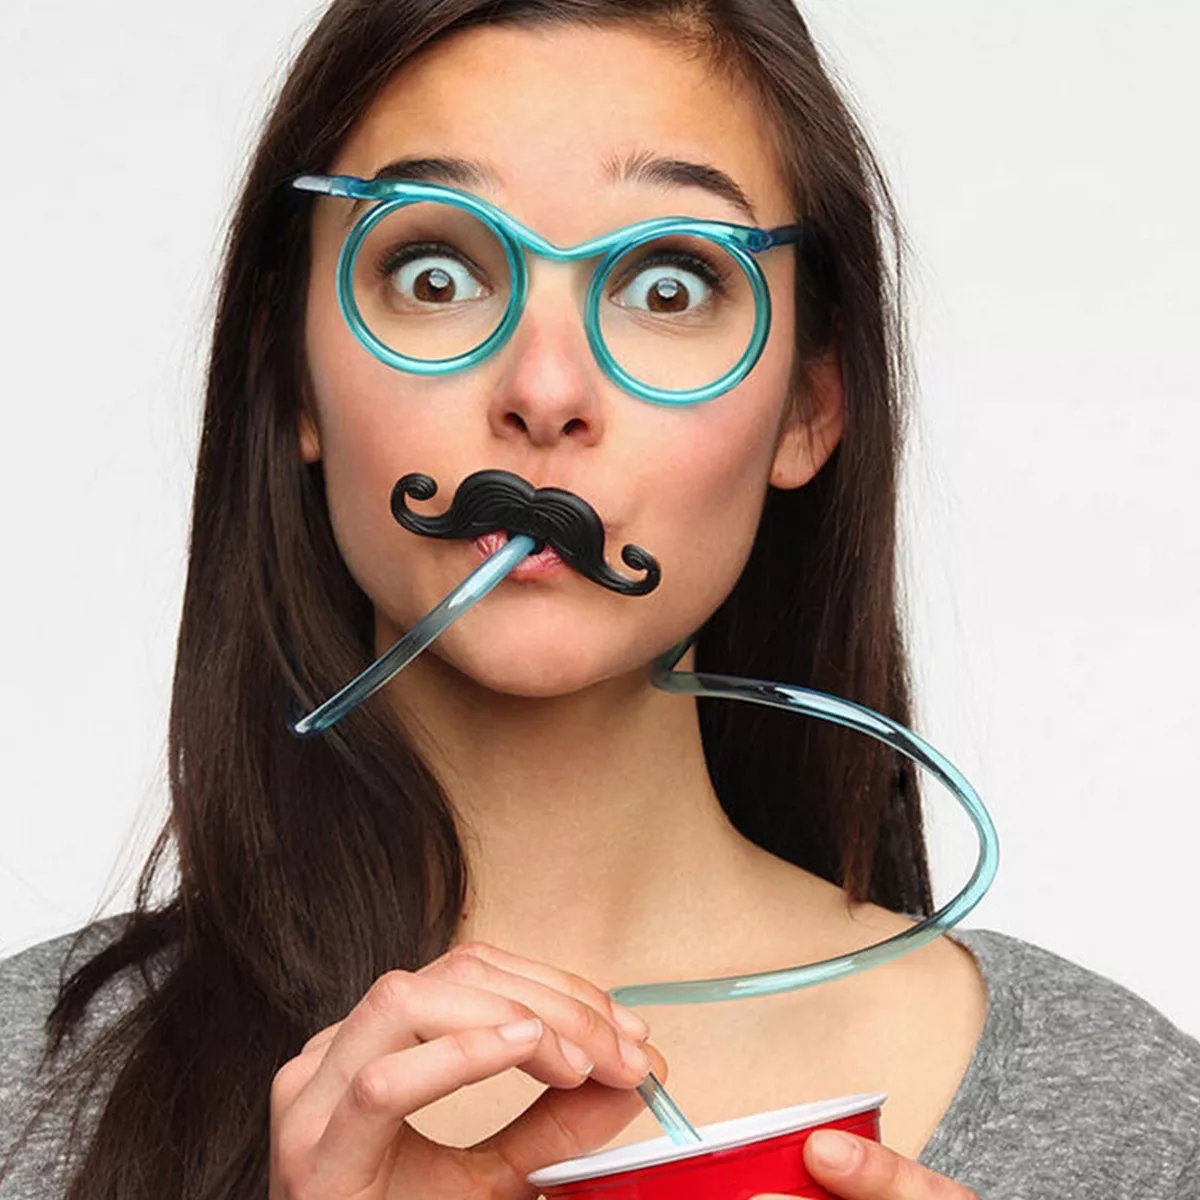 Funny Straw Drinking Glasses Party Flexible Straws Soft Cup